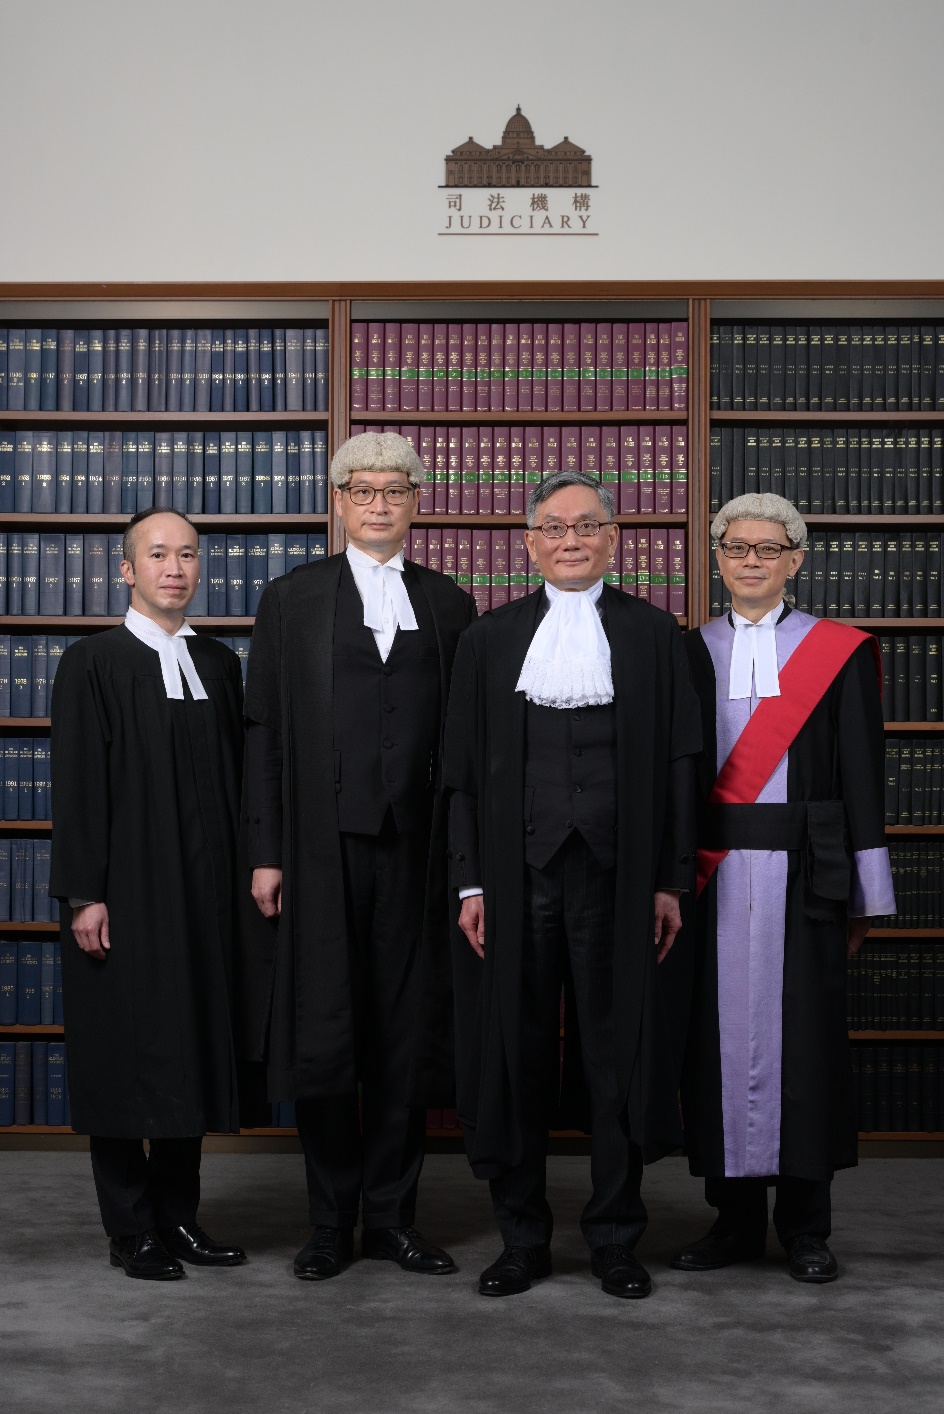 The Hon Chief Justice Andrew CHEUNG (second right), the Hon Mr Justice Jeremy POON (second left), Chief Judge of the High Court, His Honour Judge Justin KO (first right), Chief District Judge and Mr Victor So (first left), Chief Magistrate.